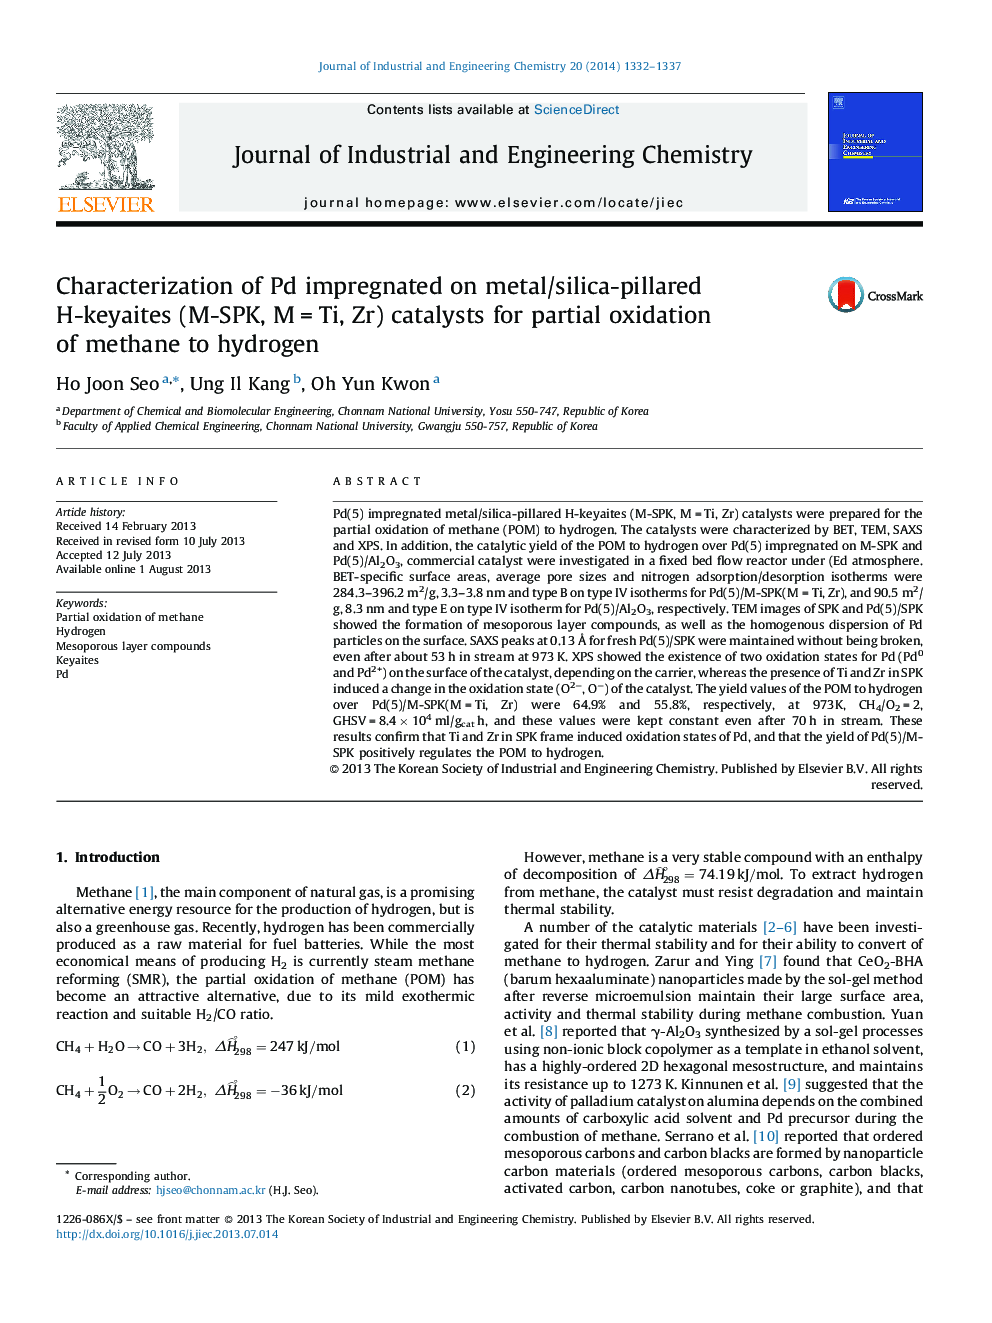 Characterization of Pd impregnated on metal/silica-pillared H-keyaites (M-SPK, M = Ti, Zr) catalysts for partial oxidation of methane to hydrogen